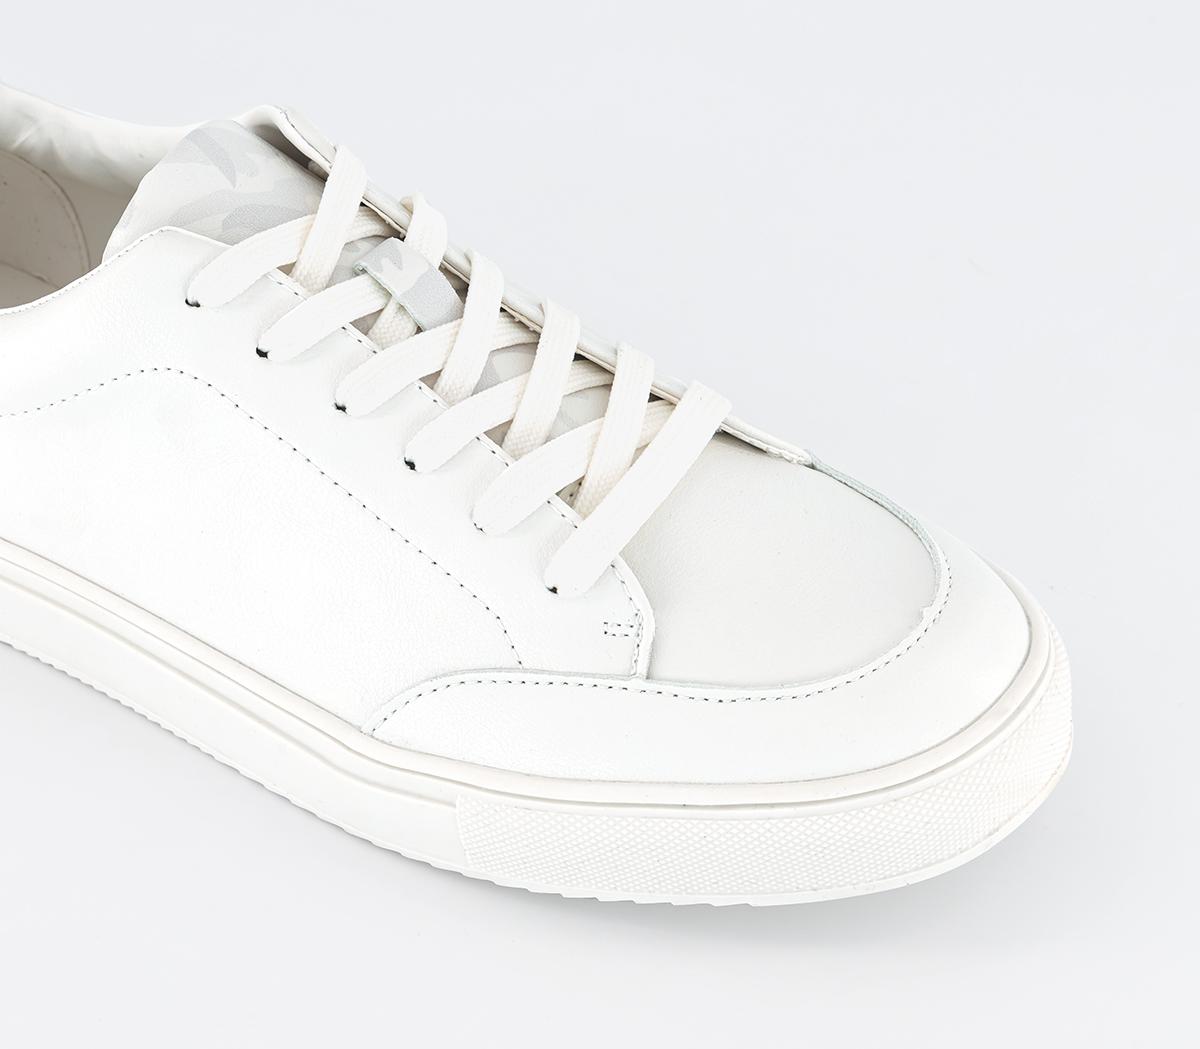 OFFICE Caden Lace Up Trainers White - Men's Casual Shoes